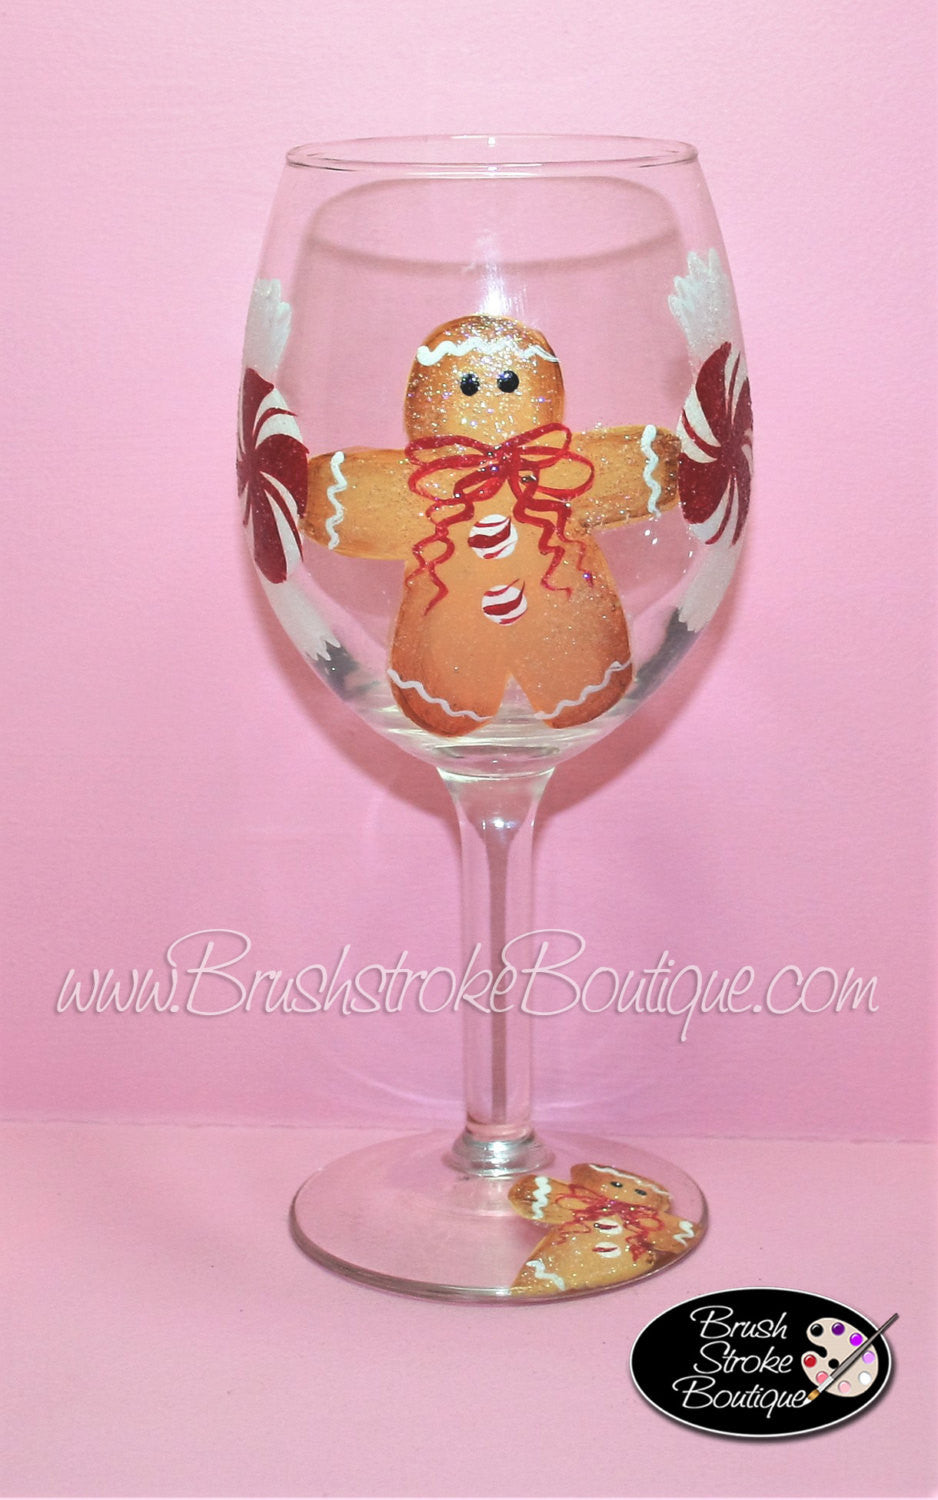 Hand Painted Wine Glass - Gingerbread - Original Designs by Cathy Kraemer